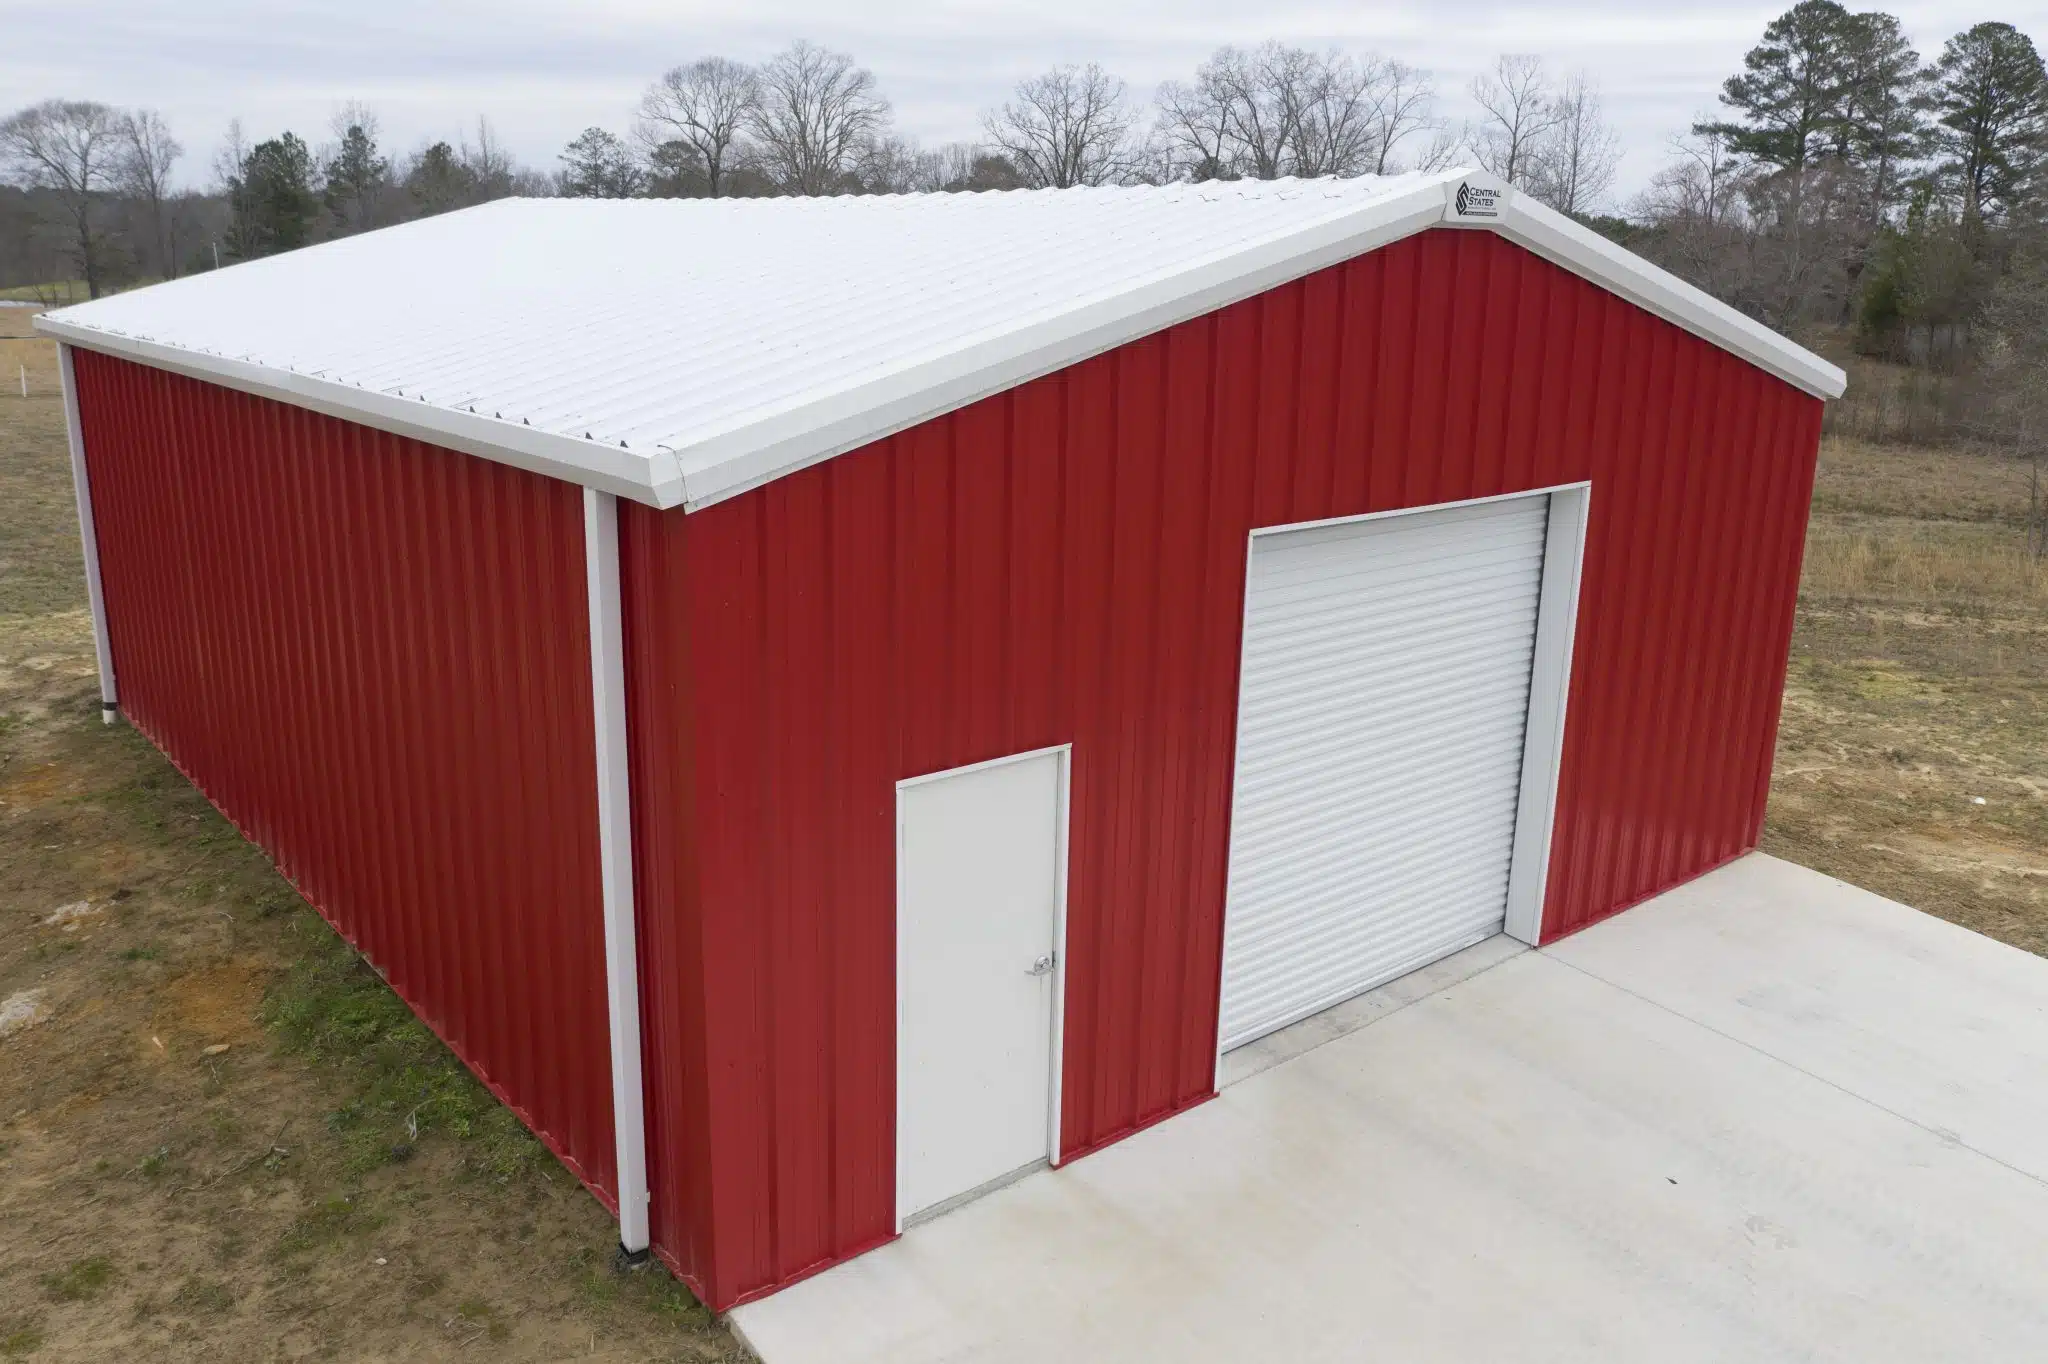 Centra Series Bolt-Up Building with R-Loc Panels, Crimson Red Walls, Polar Roof